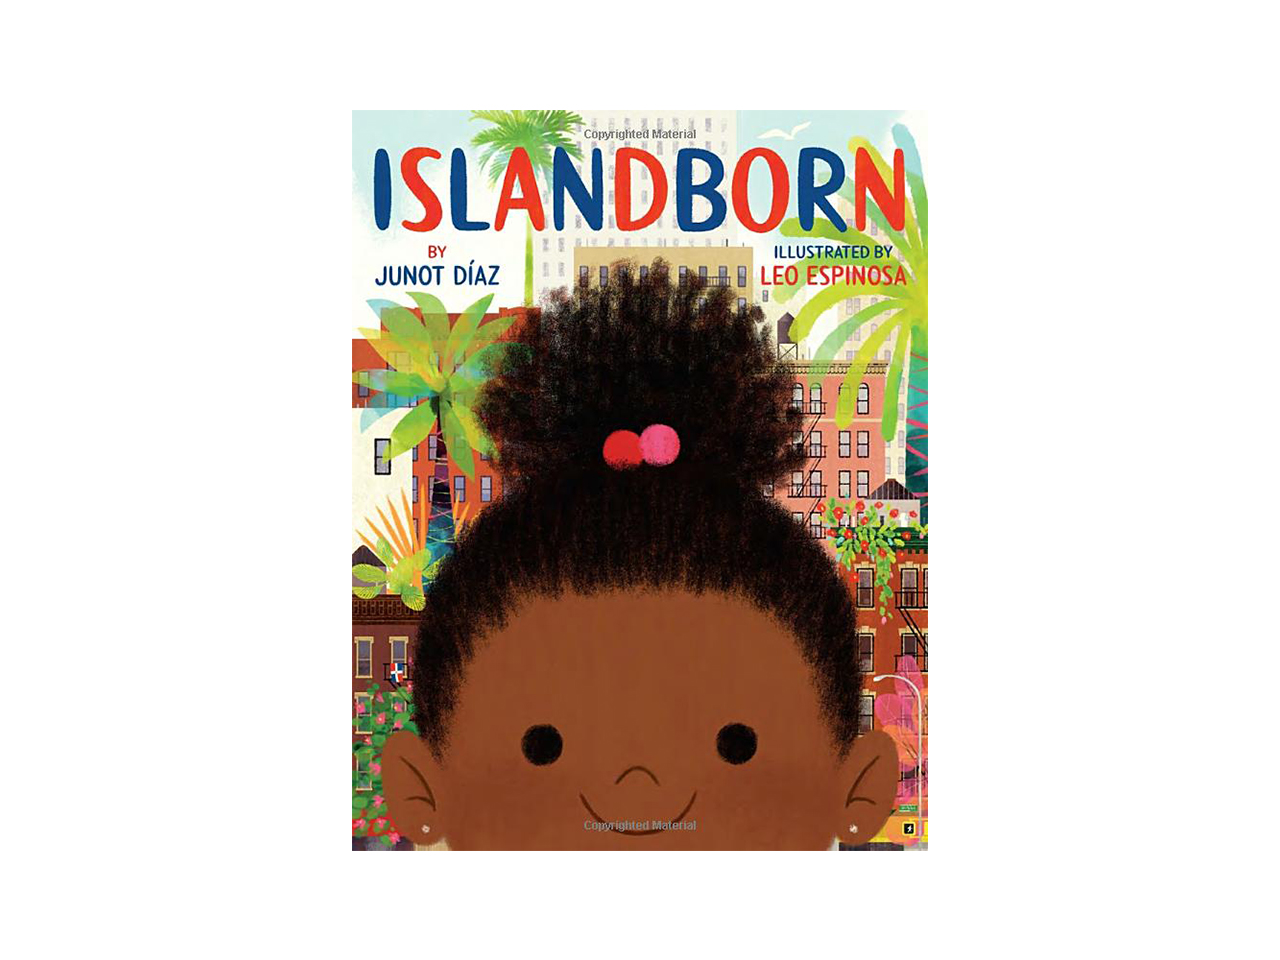 Cover art for Islandborn showing an illustrated girl's face in front of a city with lush jungle trees